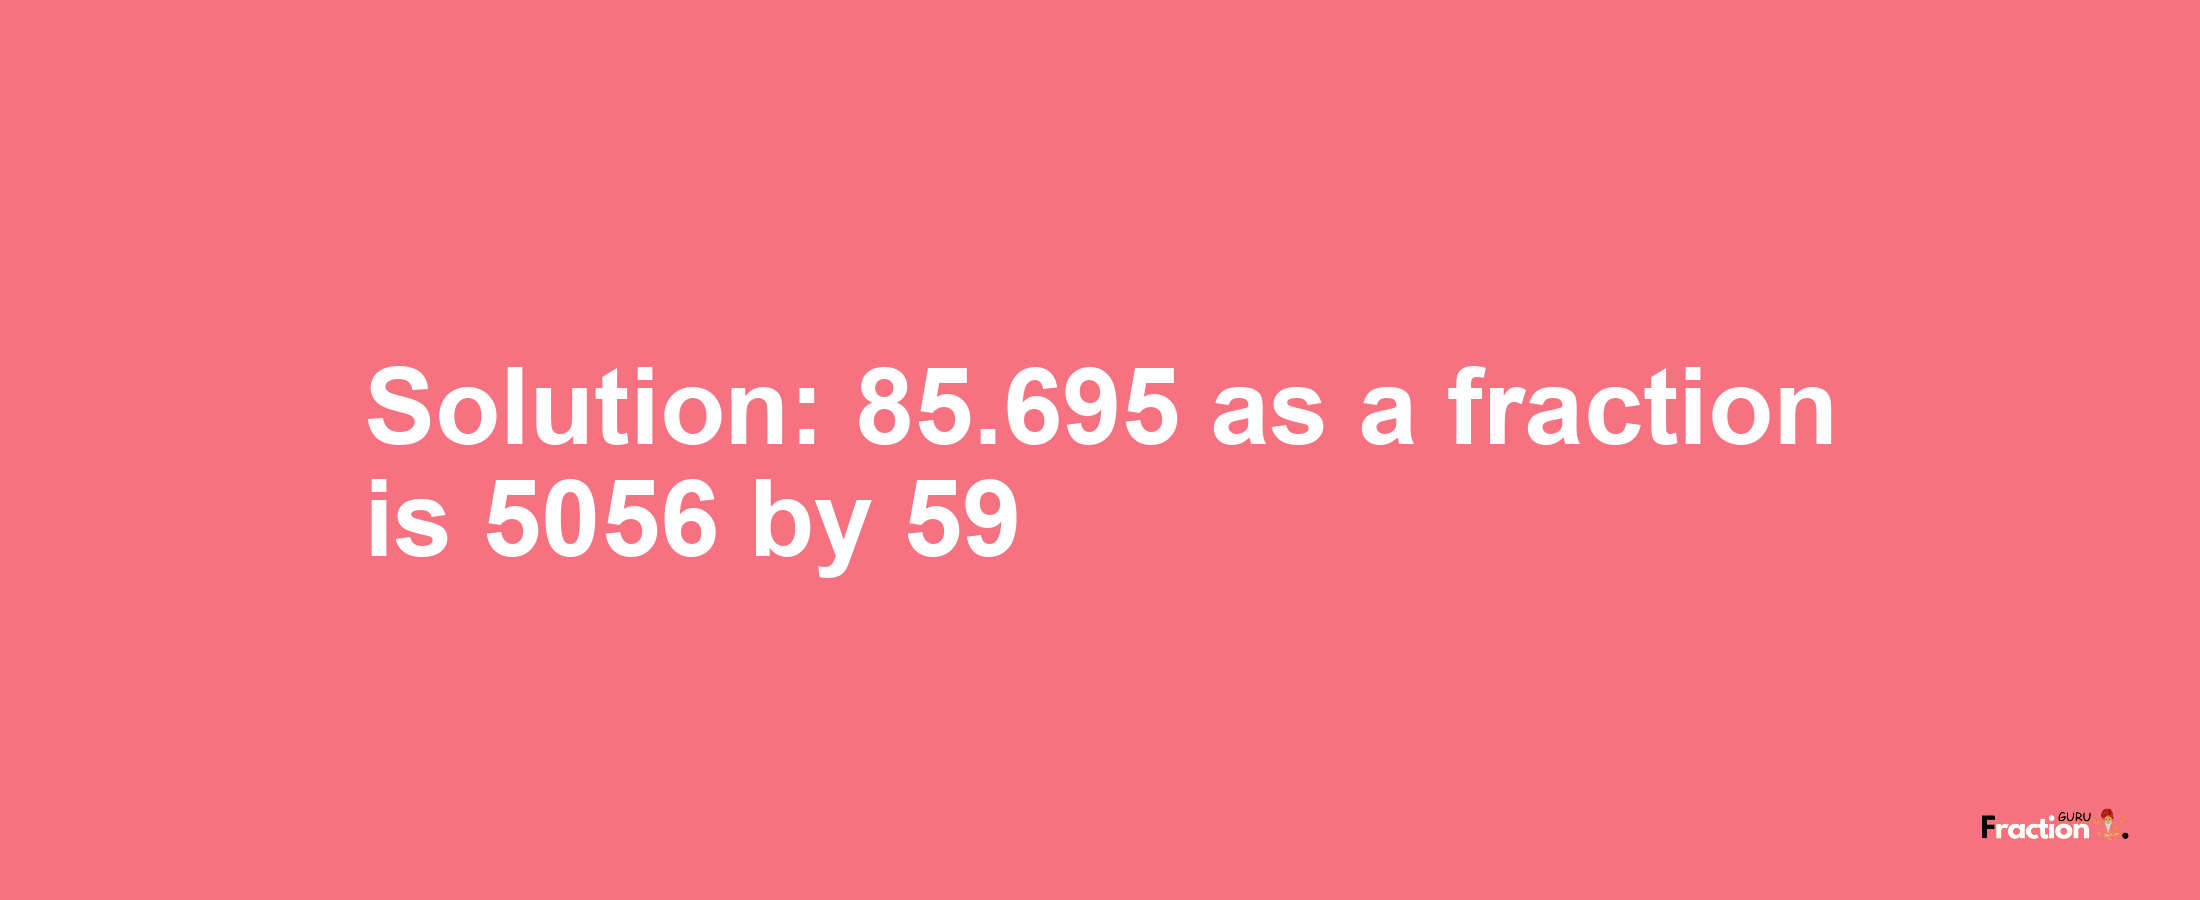 Solution:85.695 as a fraction is 5056/59